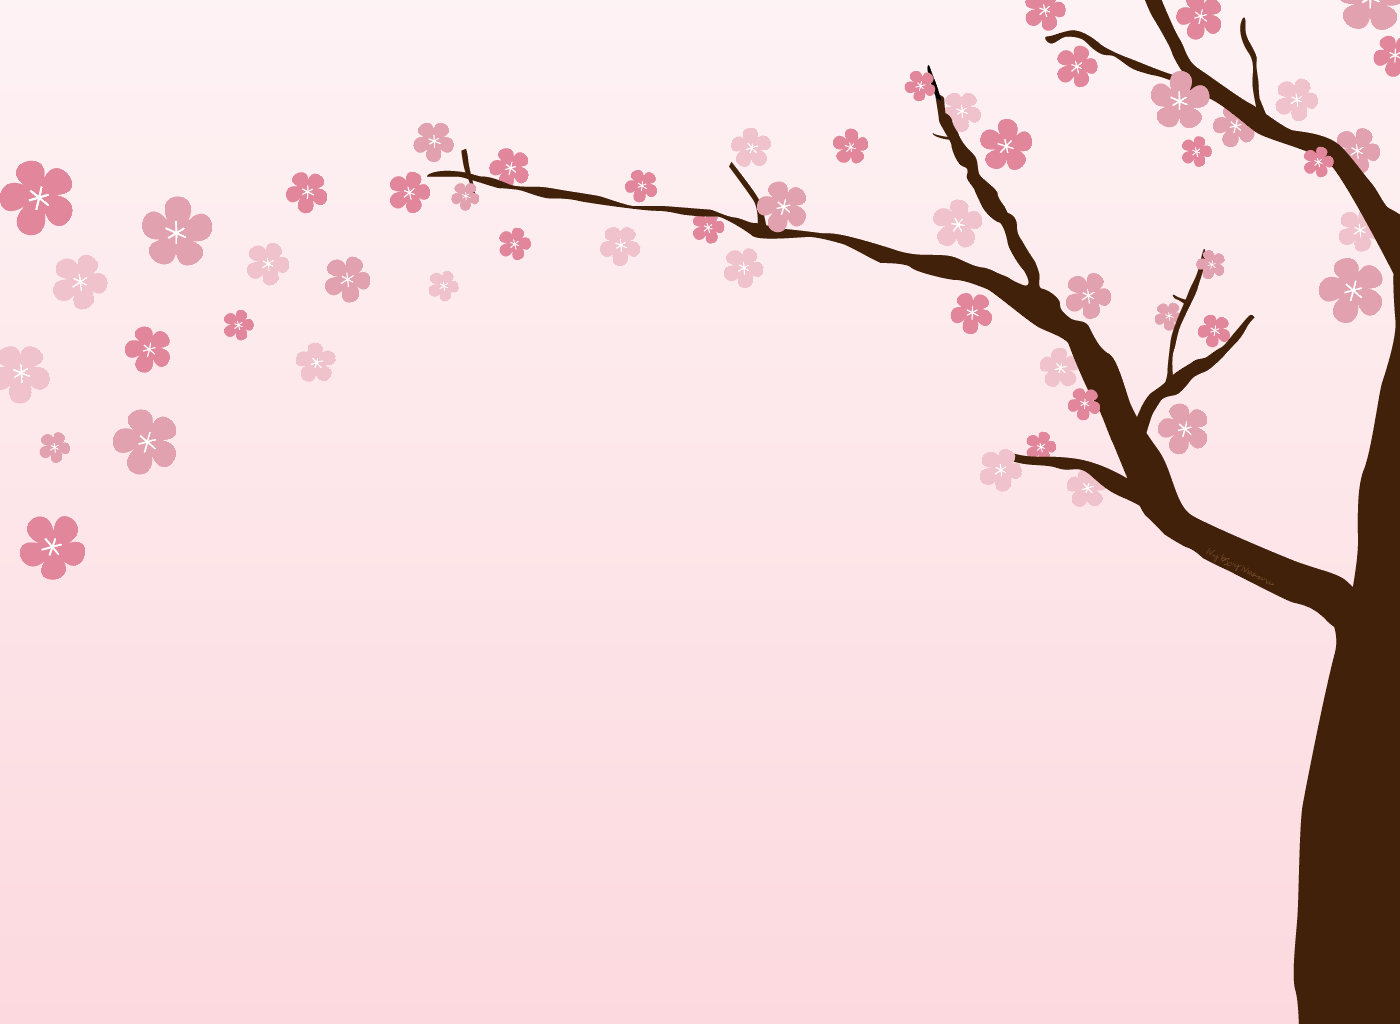 Cherry Blossoms Background